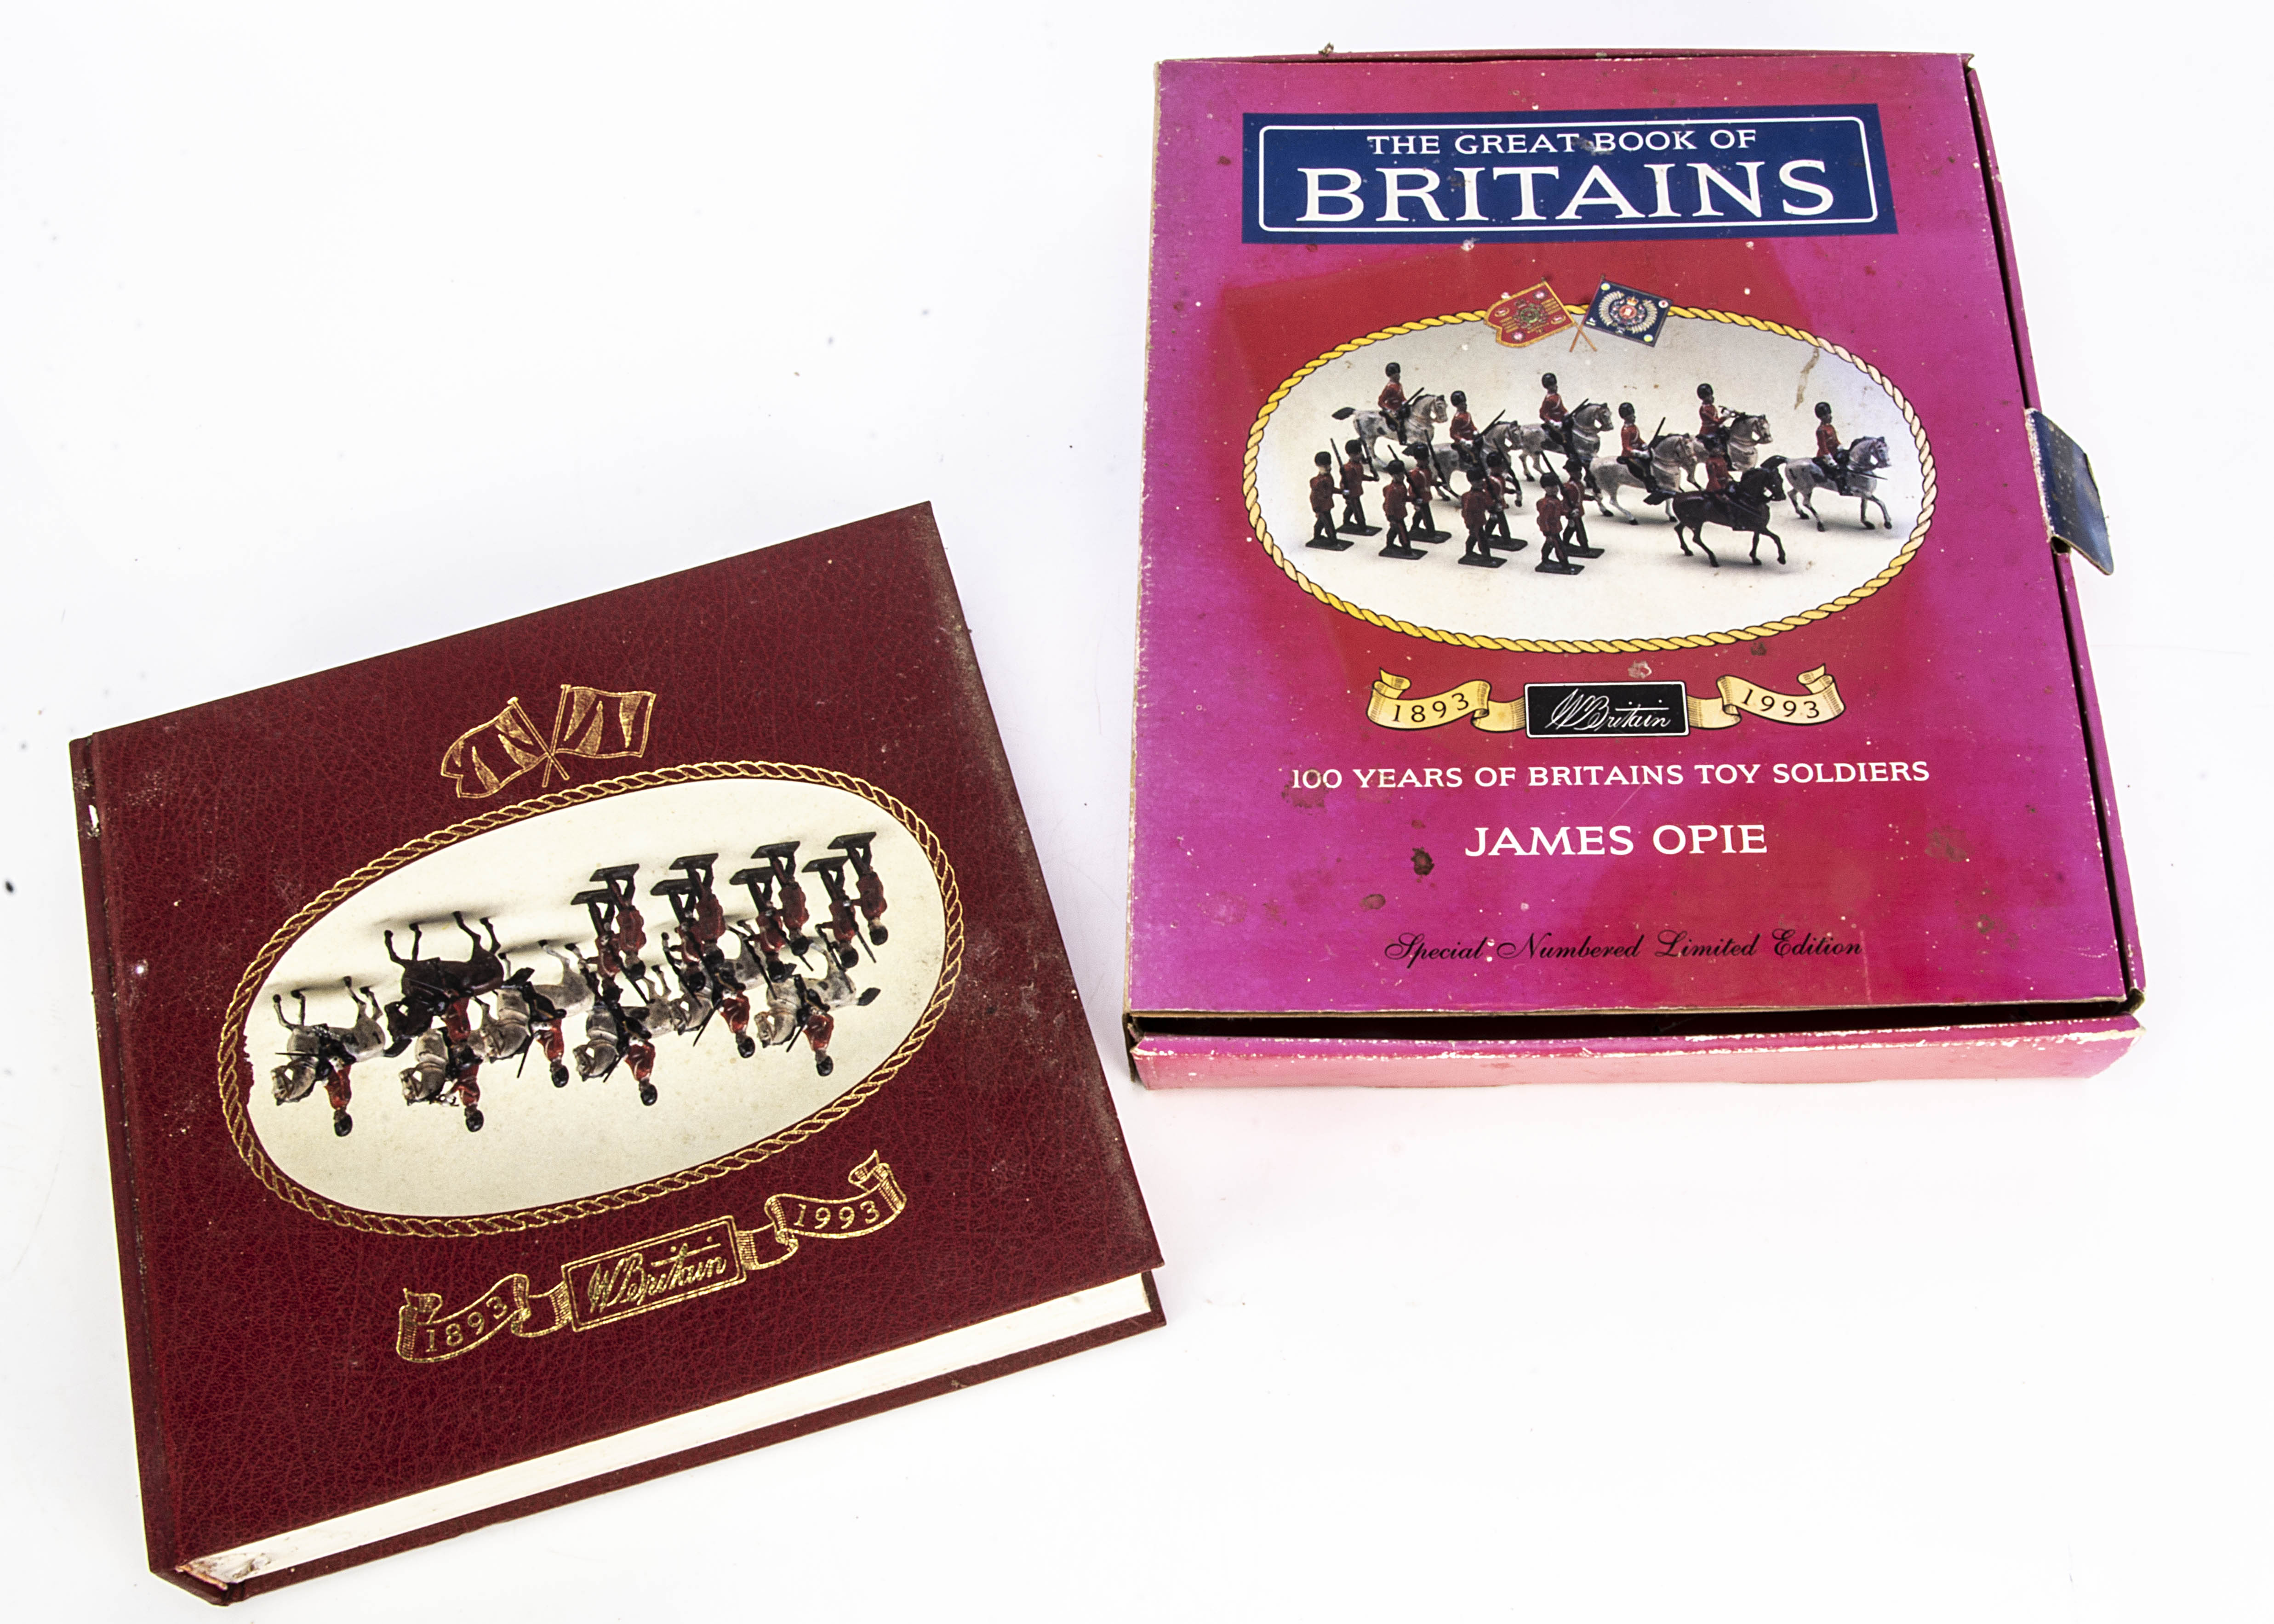 Copy of 'The Great Book of Britains' by James Opie, the illustrated front photo label has been